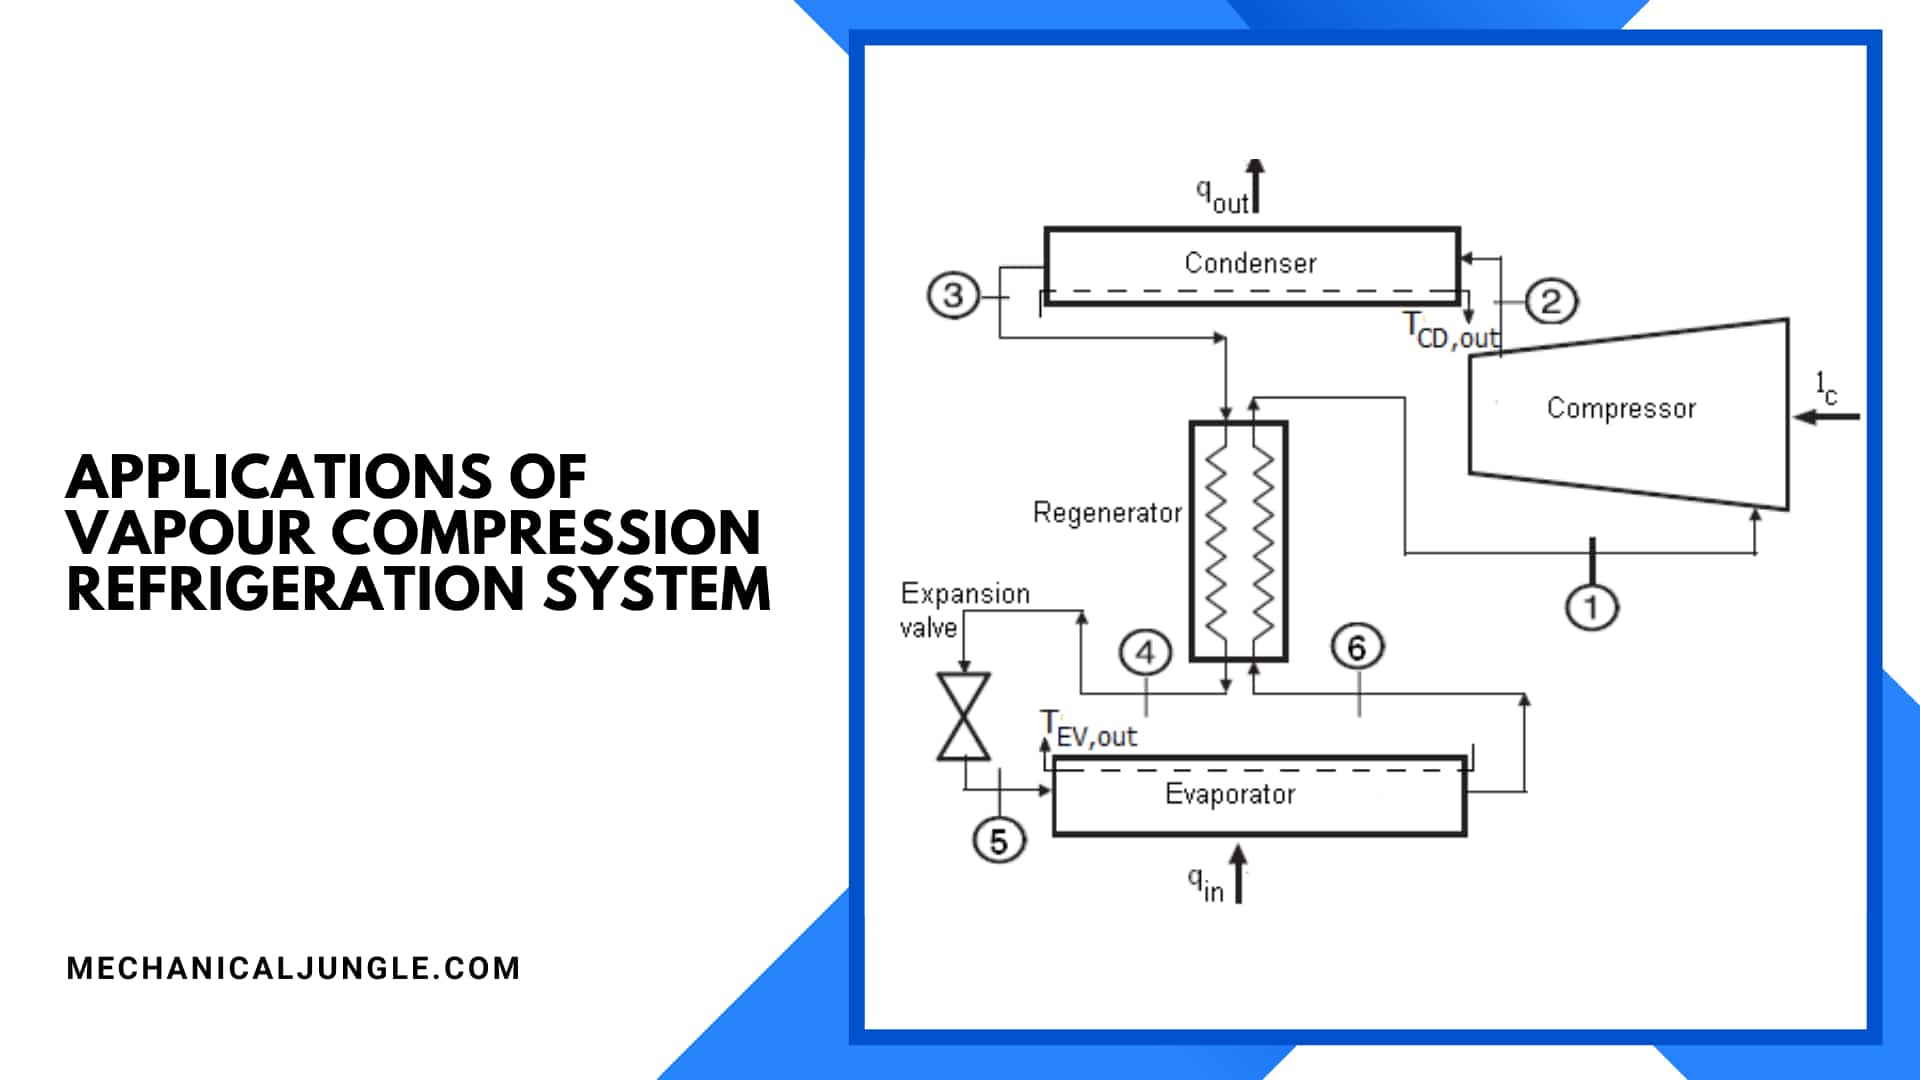 Applications of Vapour Compression Refrigeration System